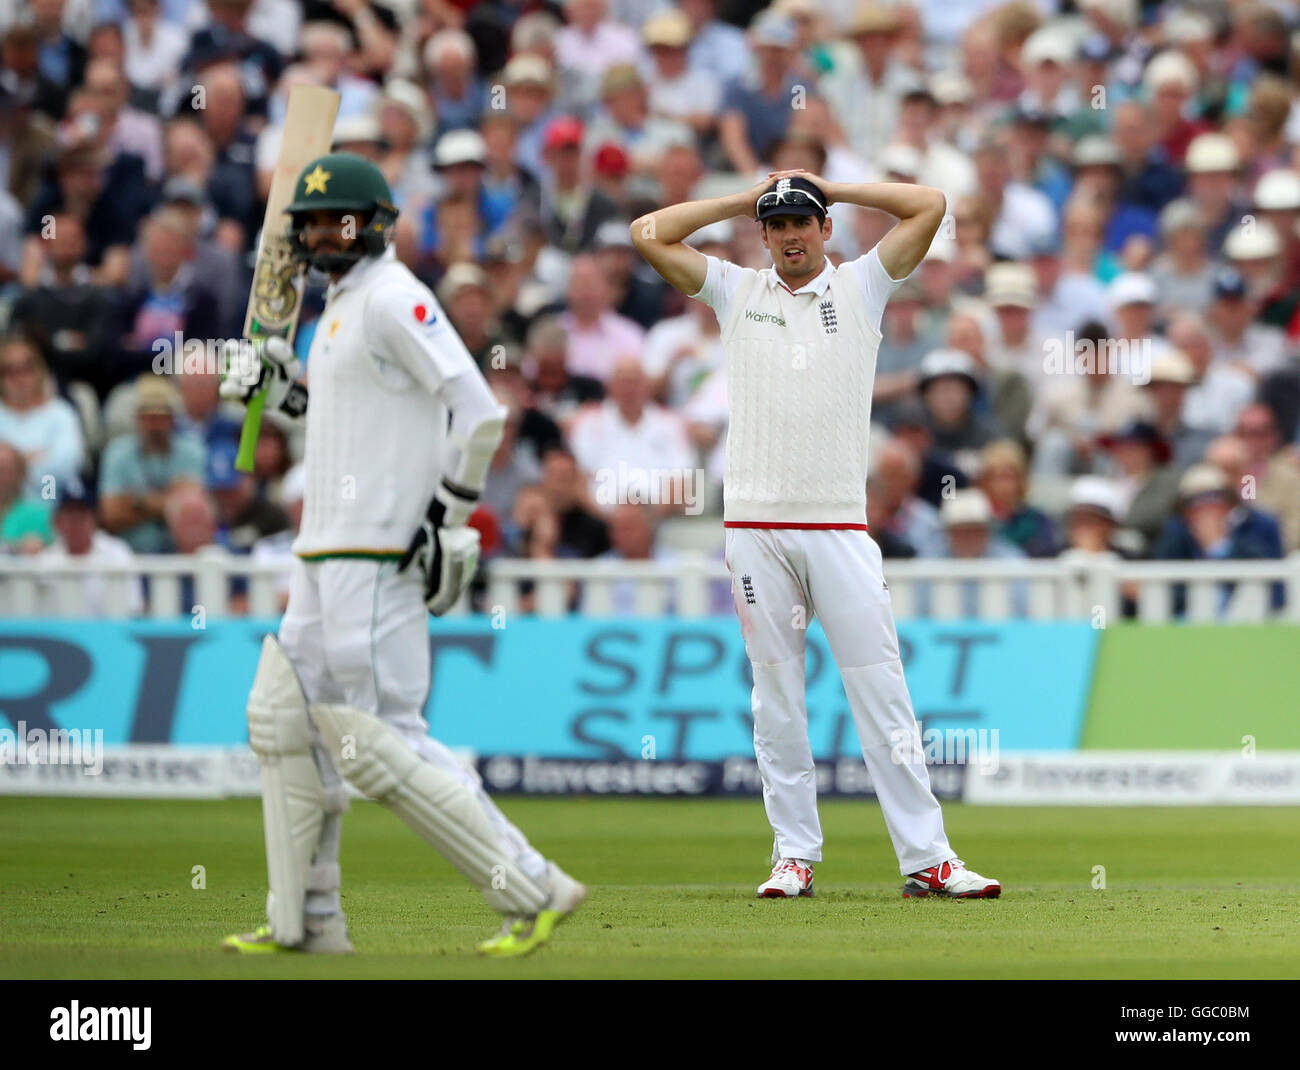 England captain Alastair Cook shows his dejection as Pakistan batsman Azhar Ali adds to his score during day two of the 3rd Investec Test Match at Edgbaston, Birmingham. Stock Photo